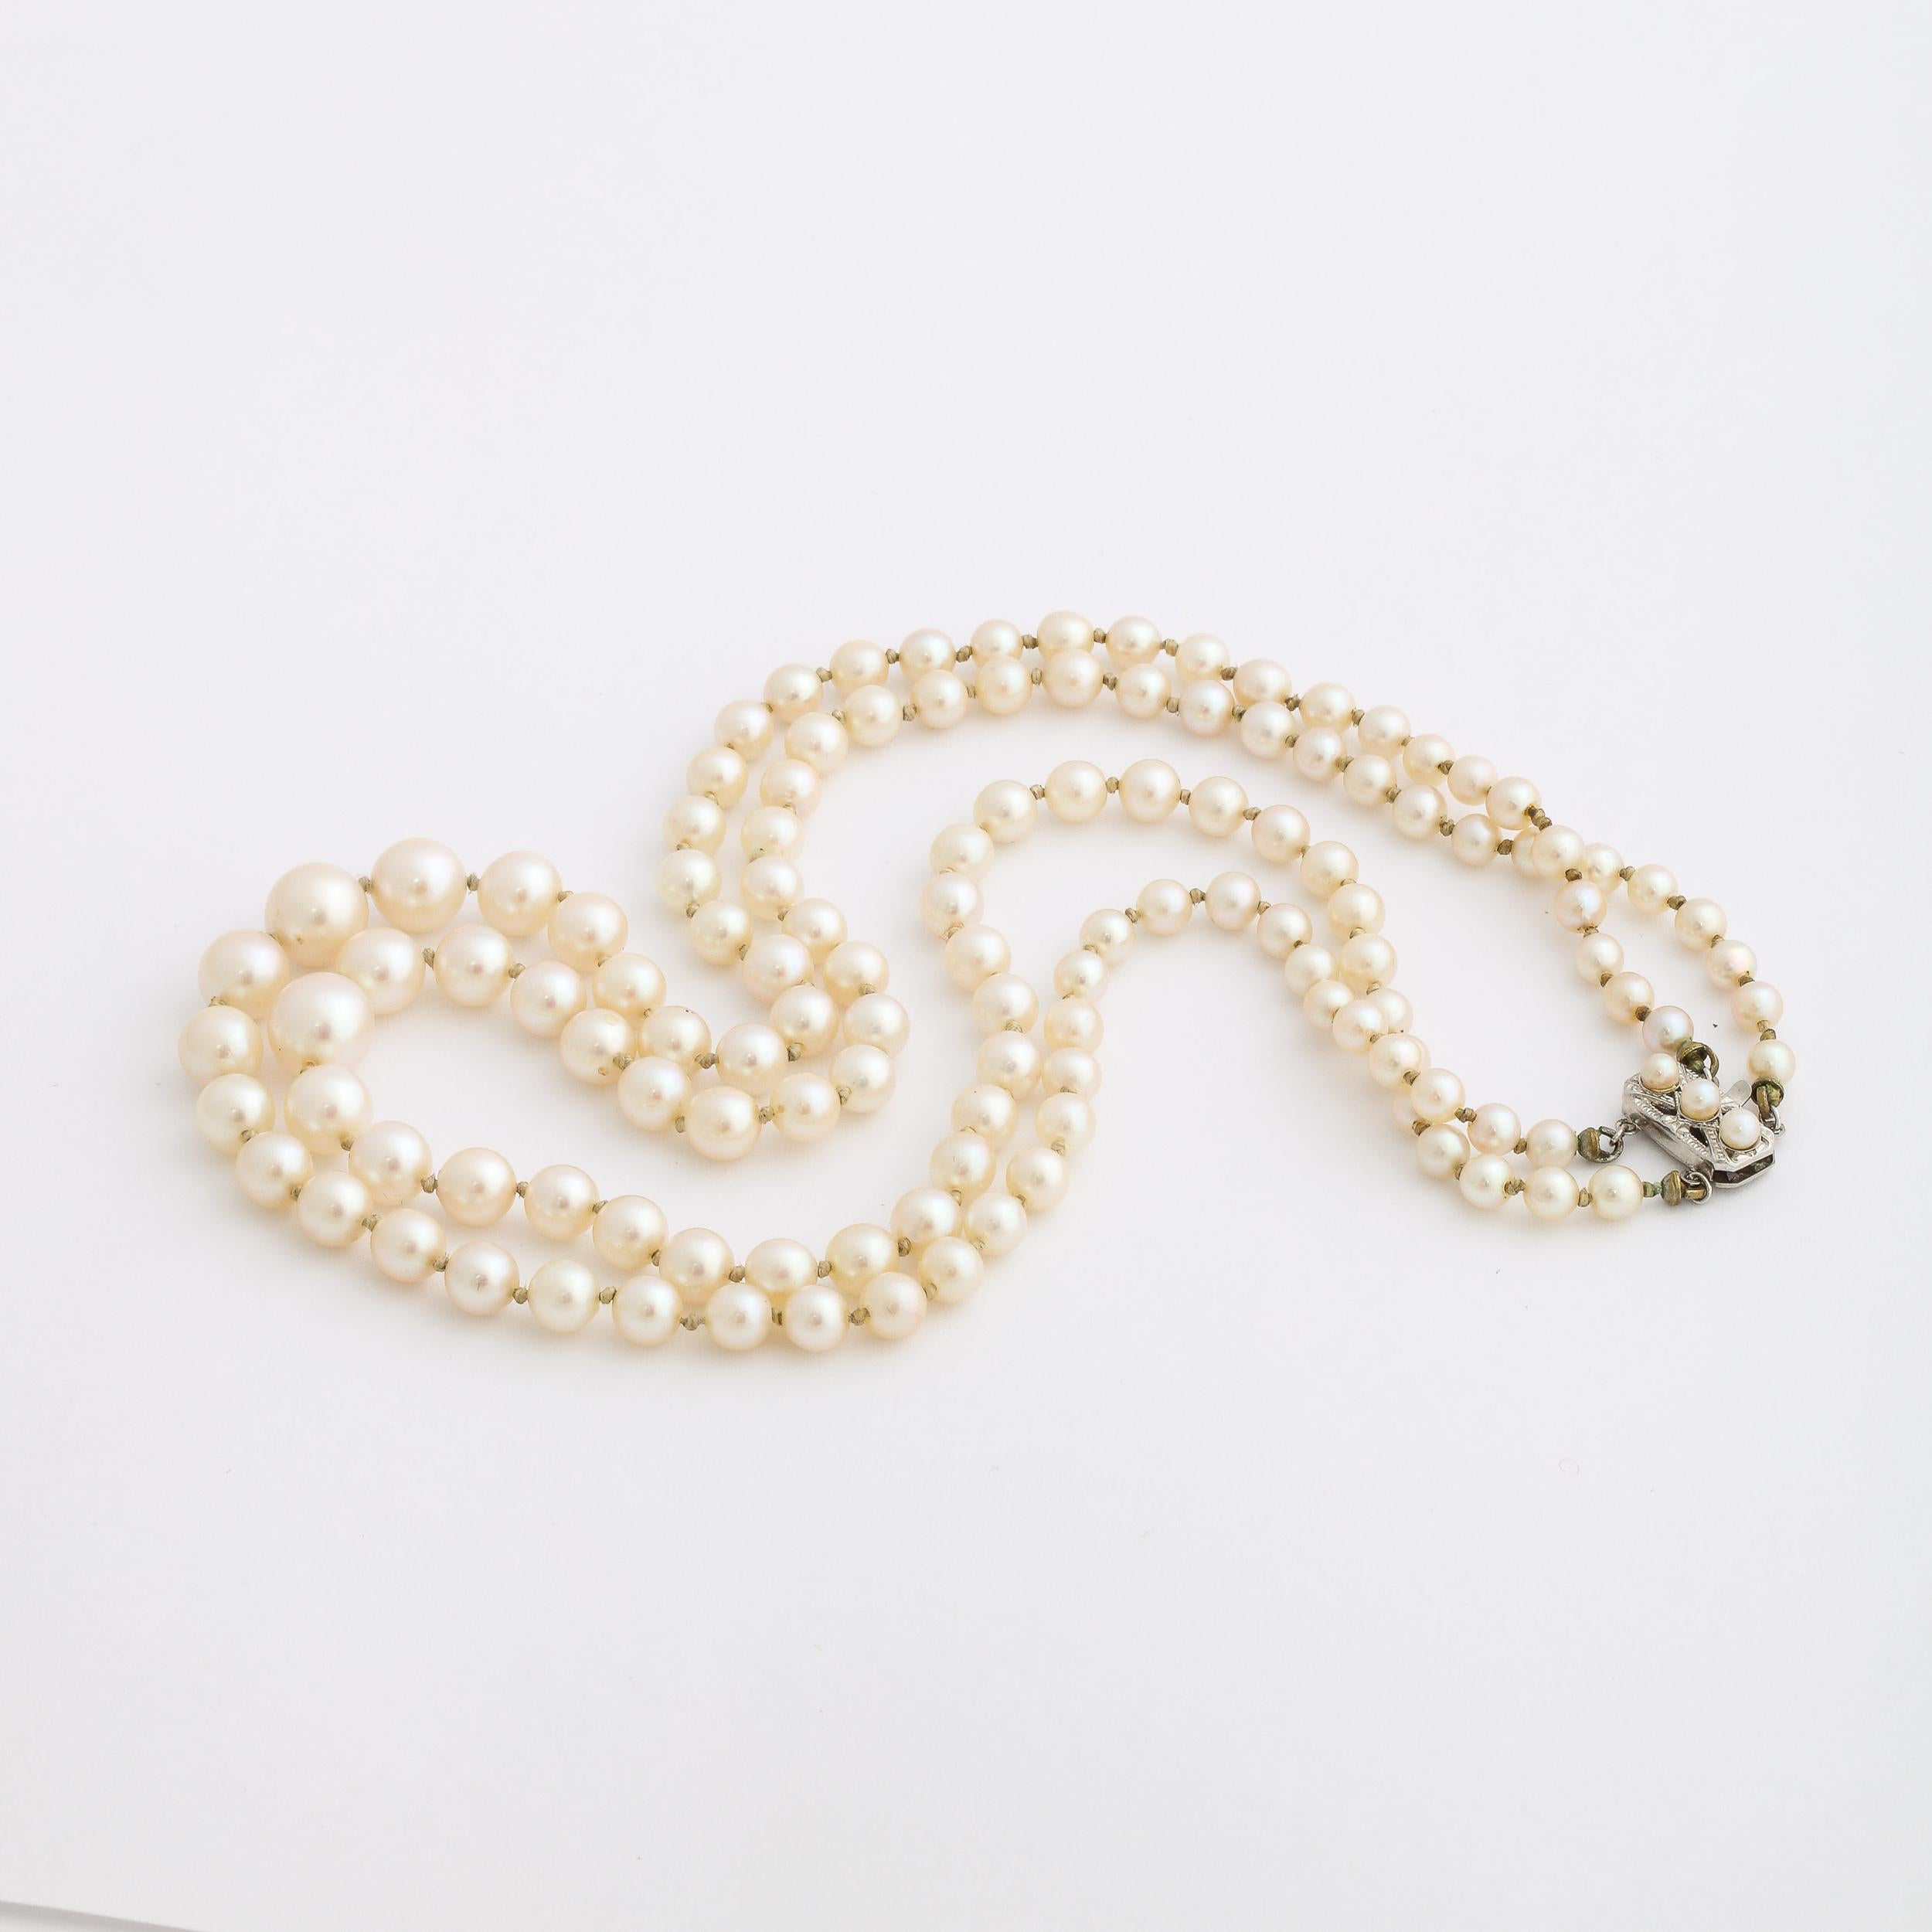 Women's or Men's Mid Century Graduated Double Strand Pearl Necklace with 14k gold and Pearl Clasp